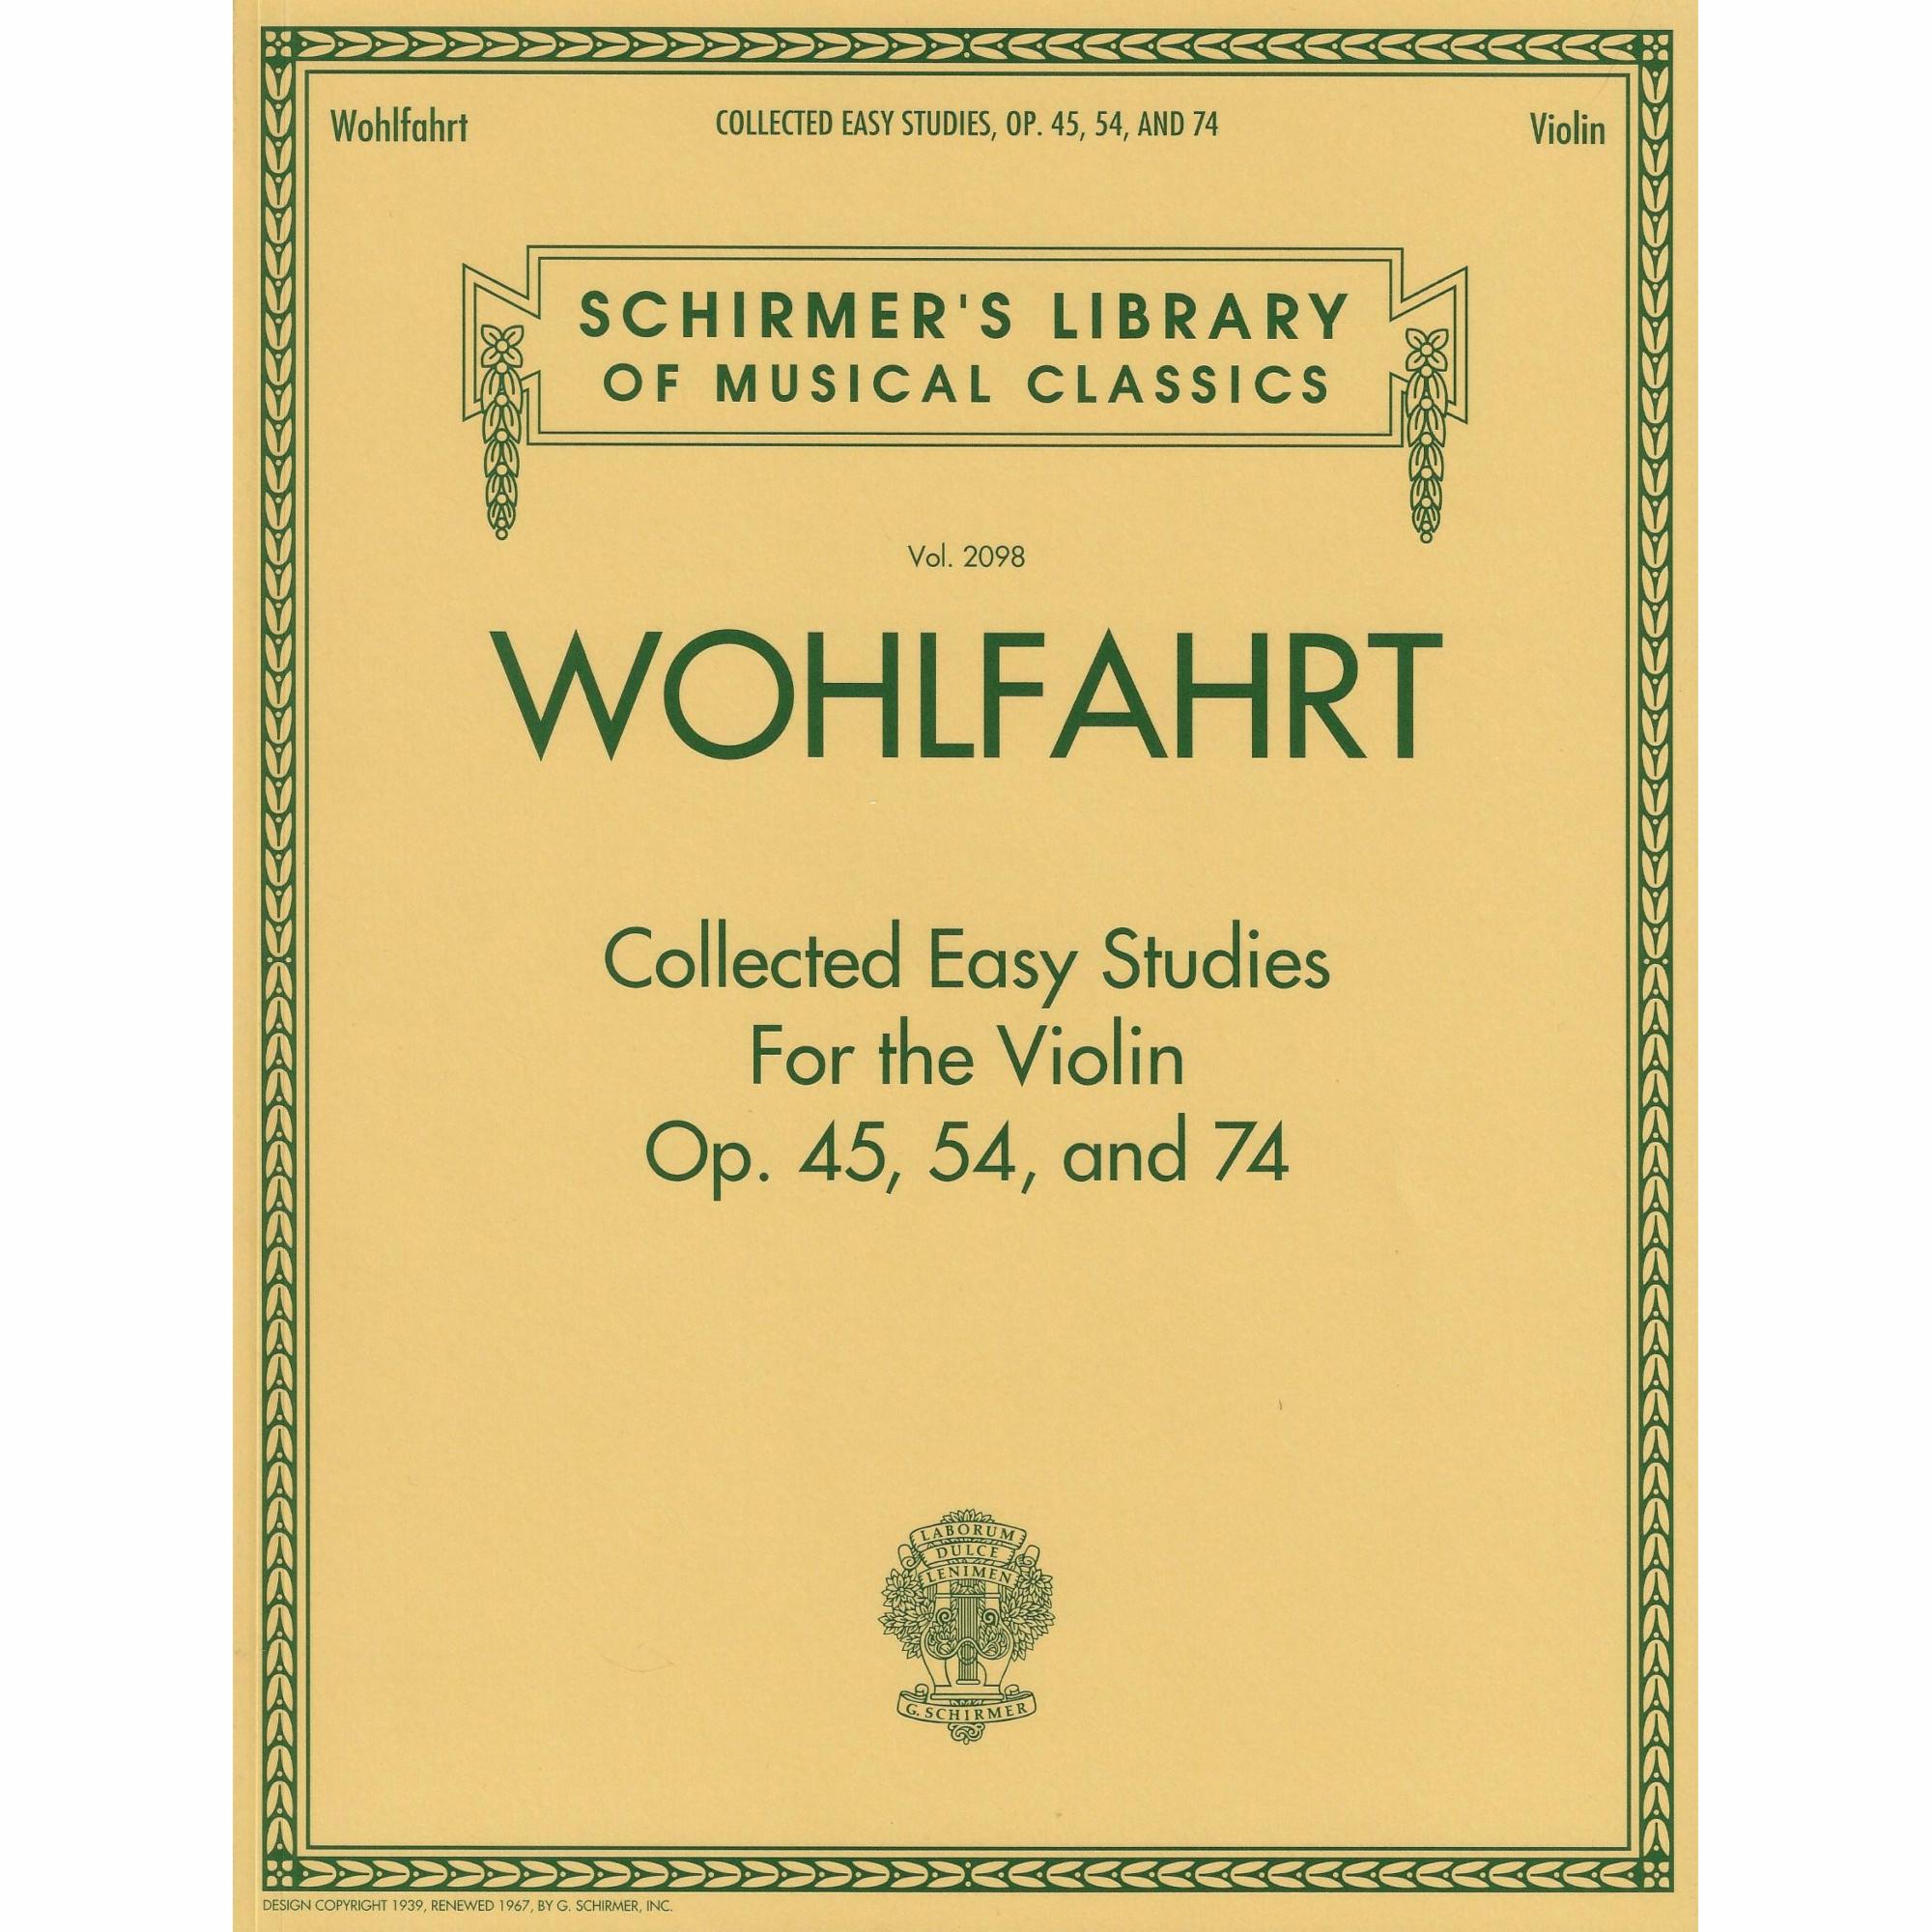 Wohlfahrt -- Collected Easy Studies, from Opp. 45, 54, and 74 for Violin